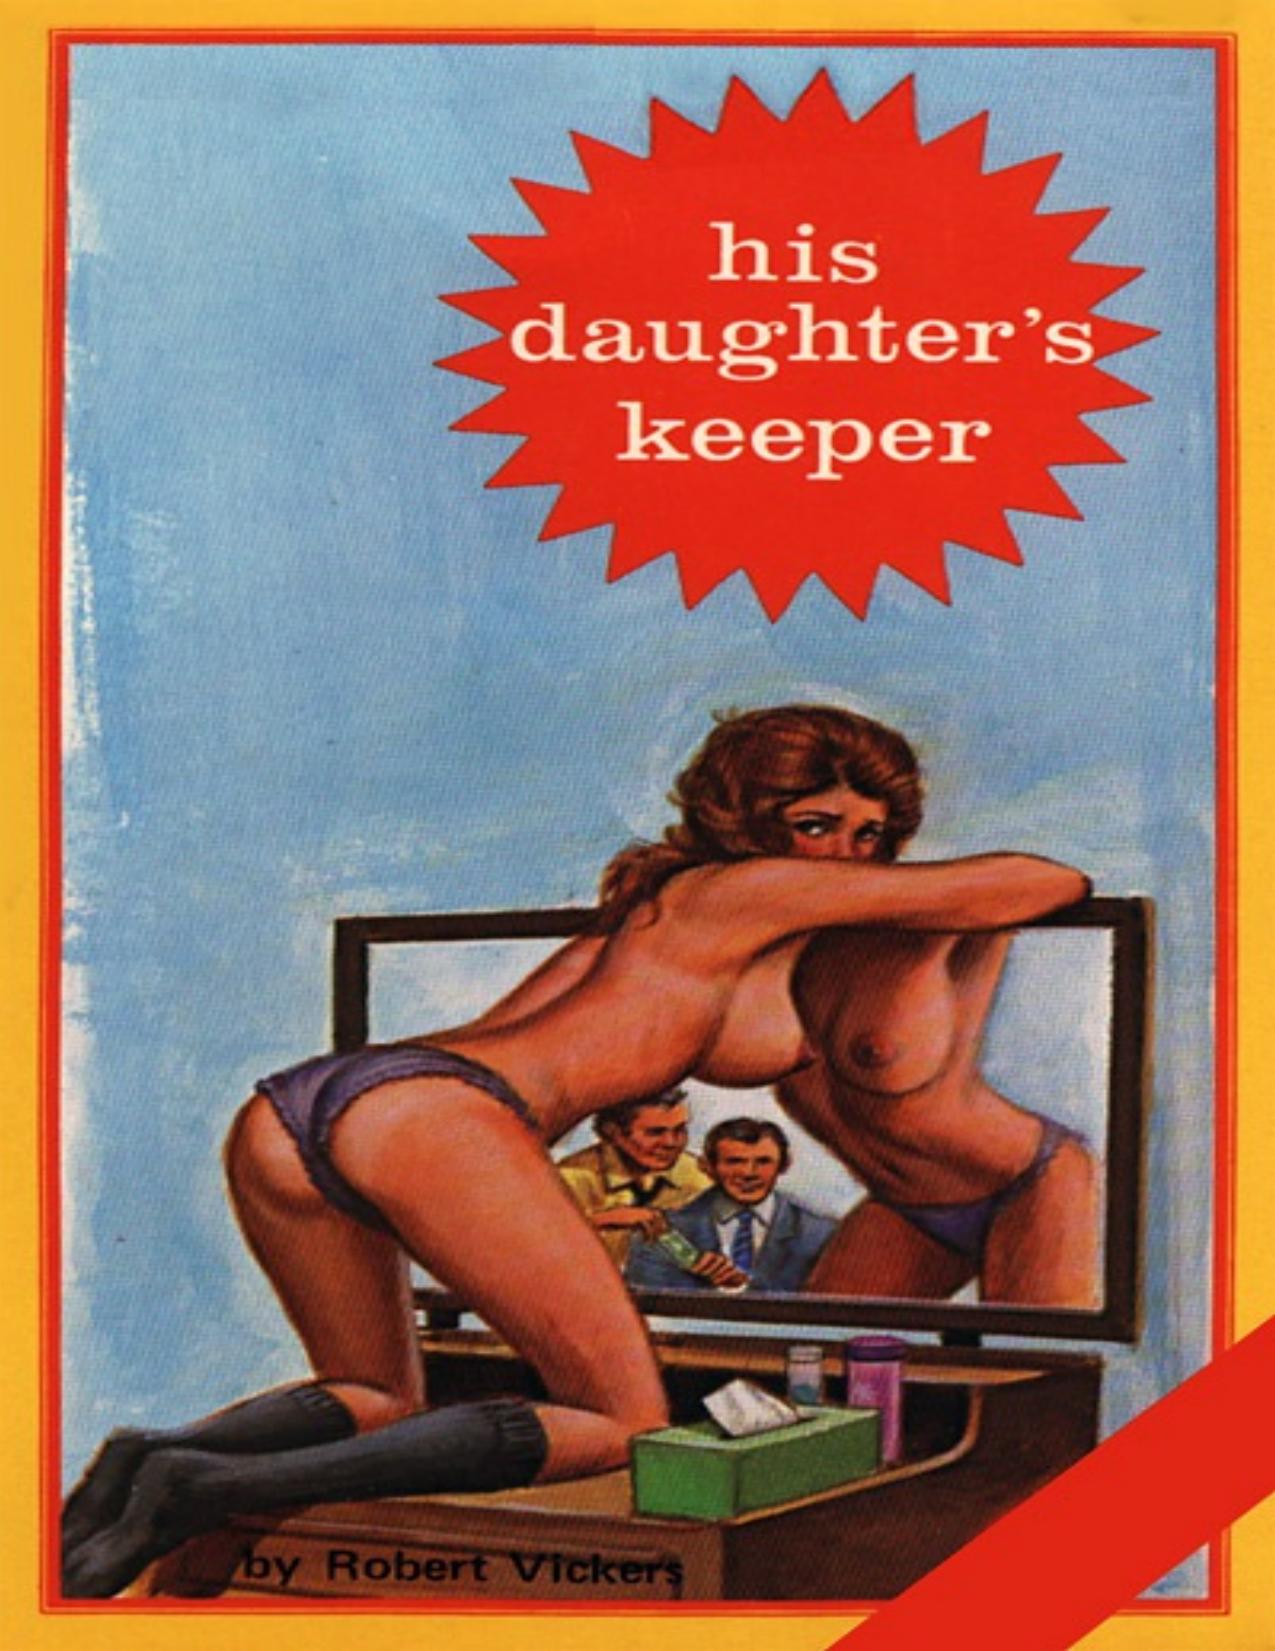 His Daughter's Keeper by Robert Vickers